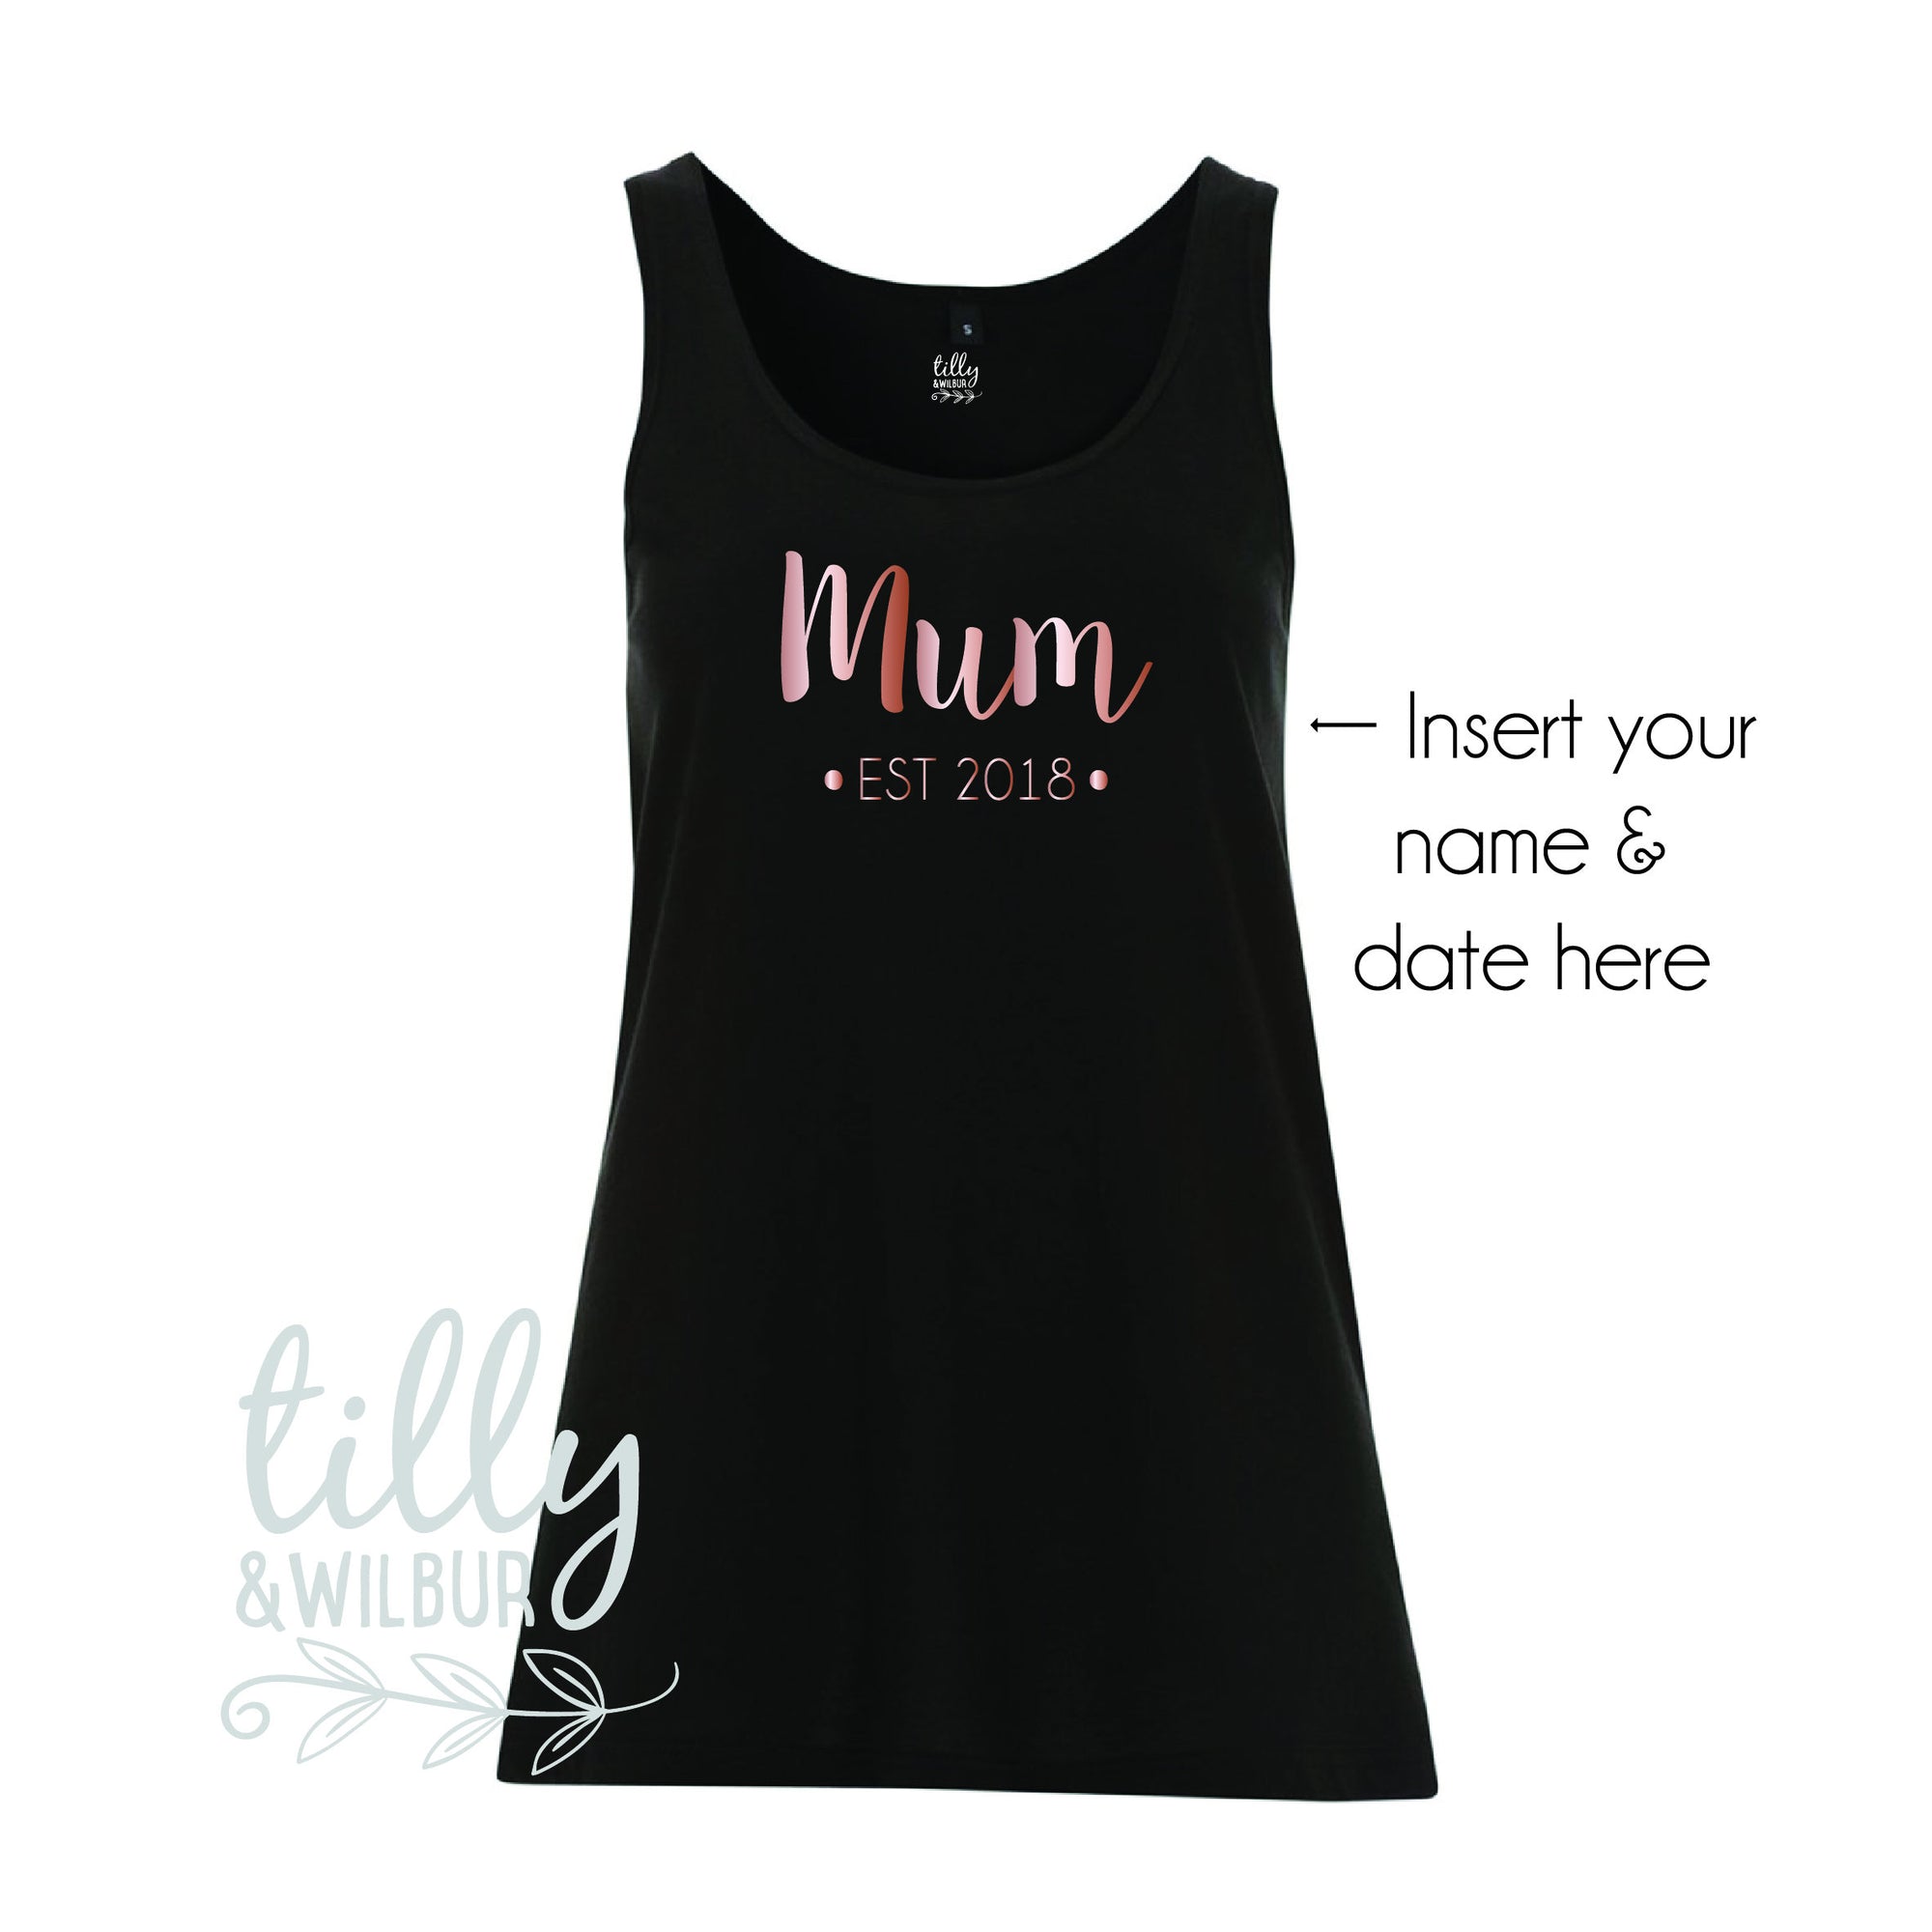 Mum Est 2018, Personalised With Your Own Date, Mother's Day Singlet, 1st Mothers Day, First Mother's Day Gift, Fair Trade Organic Cotton